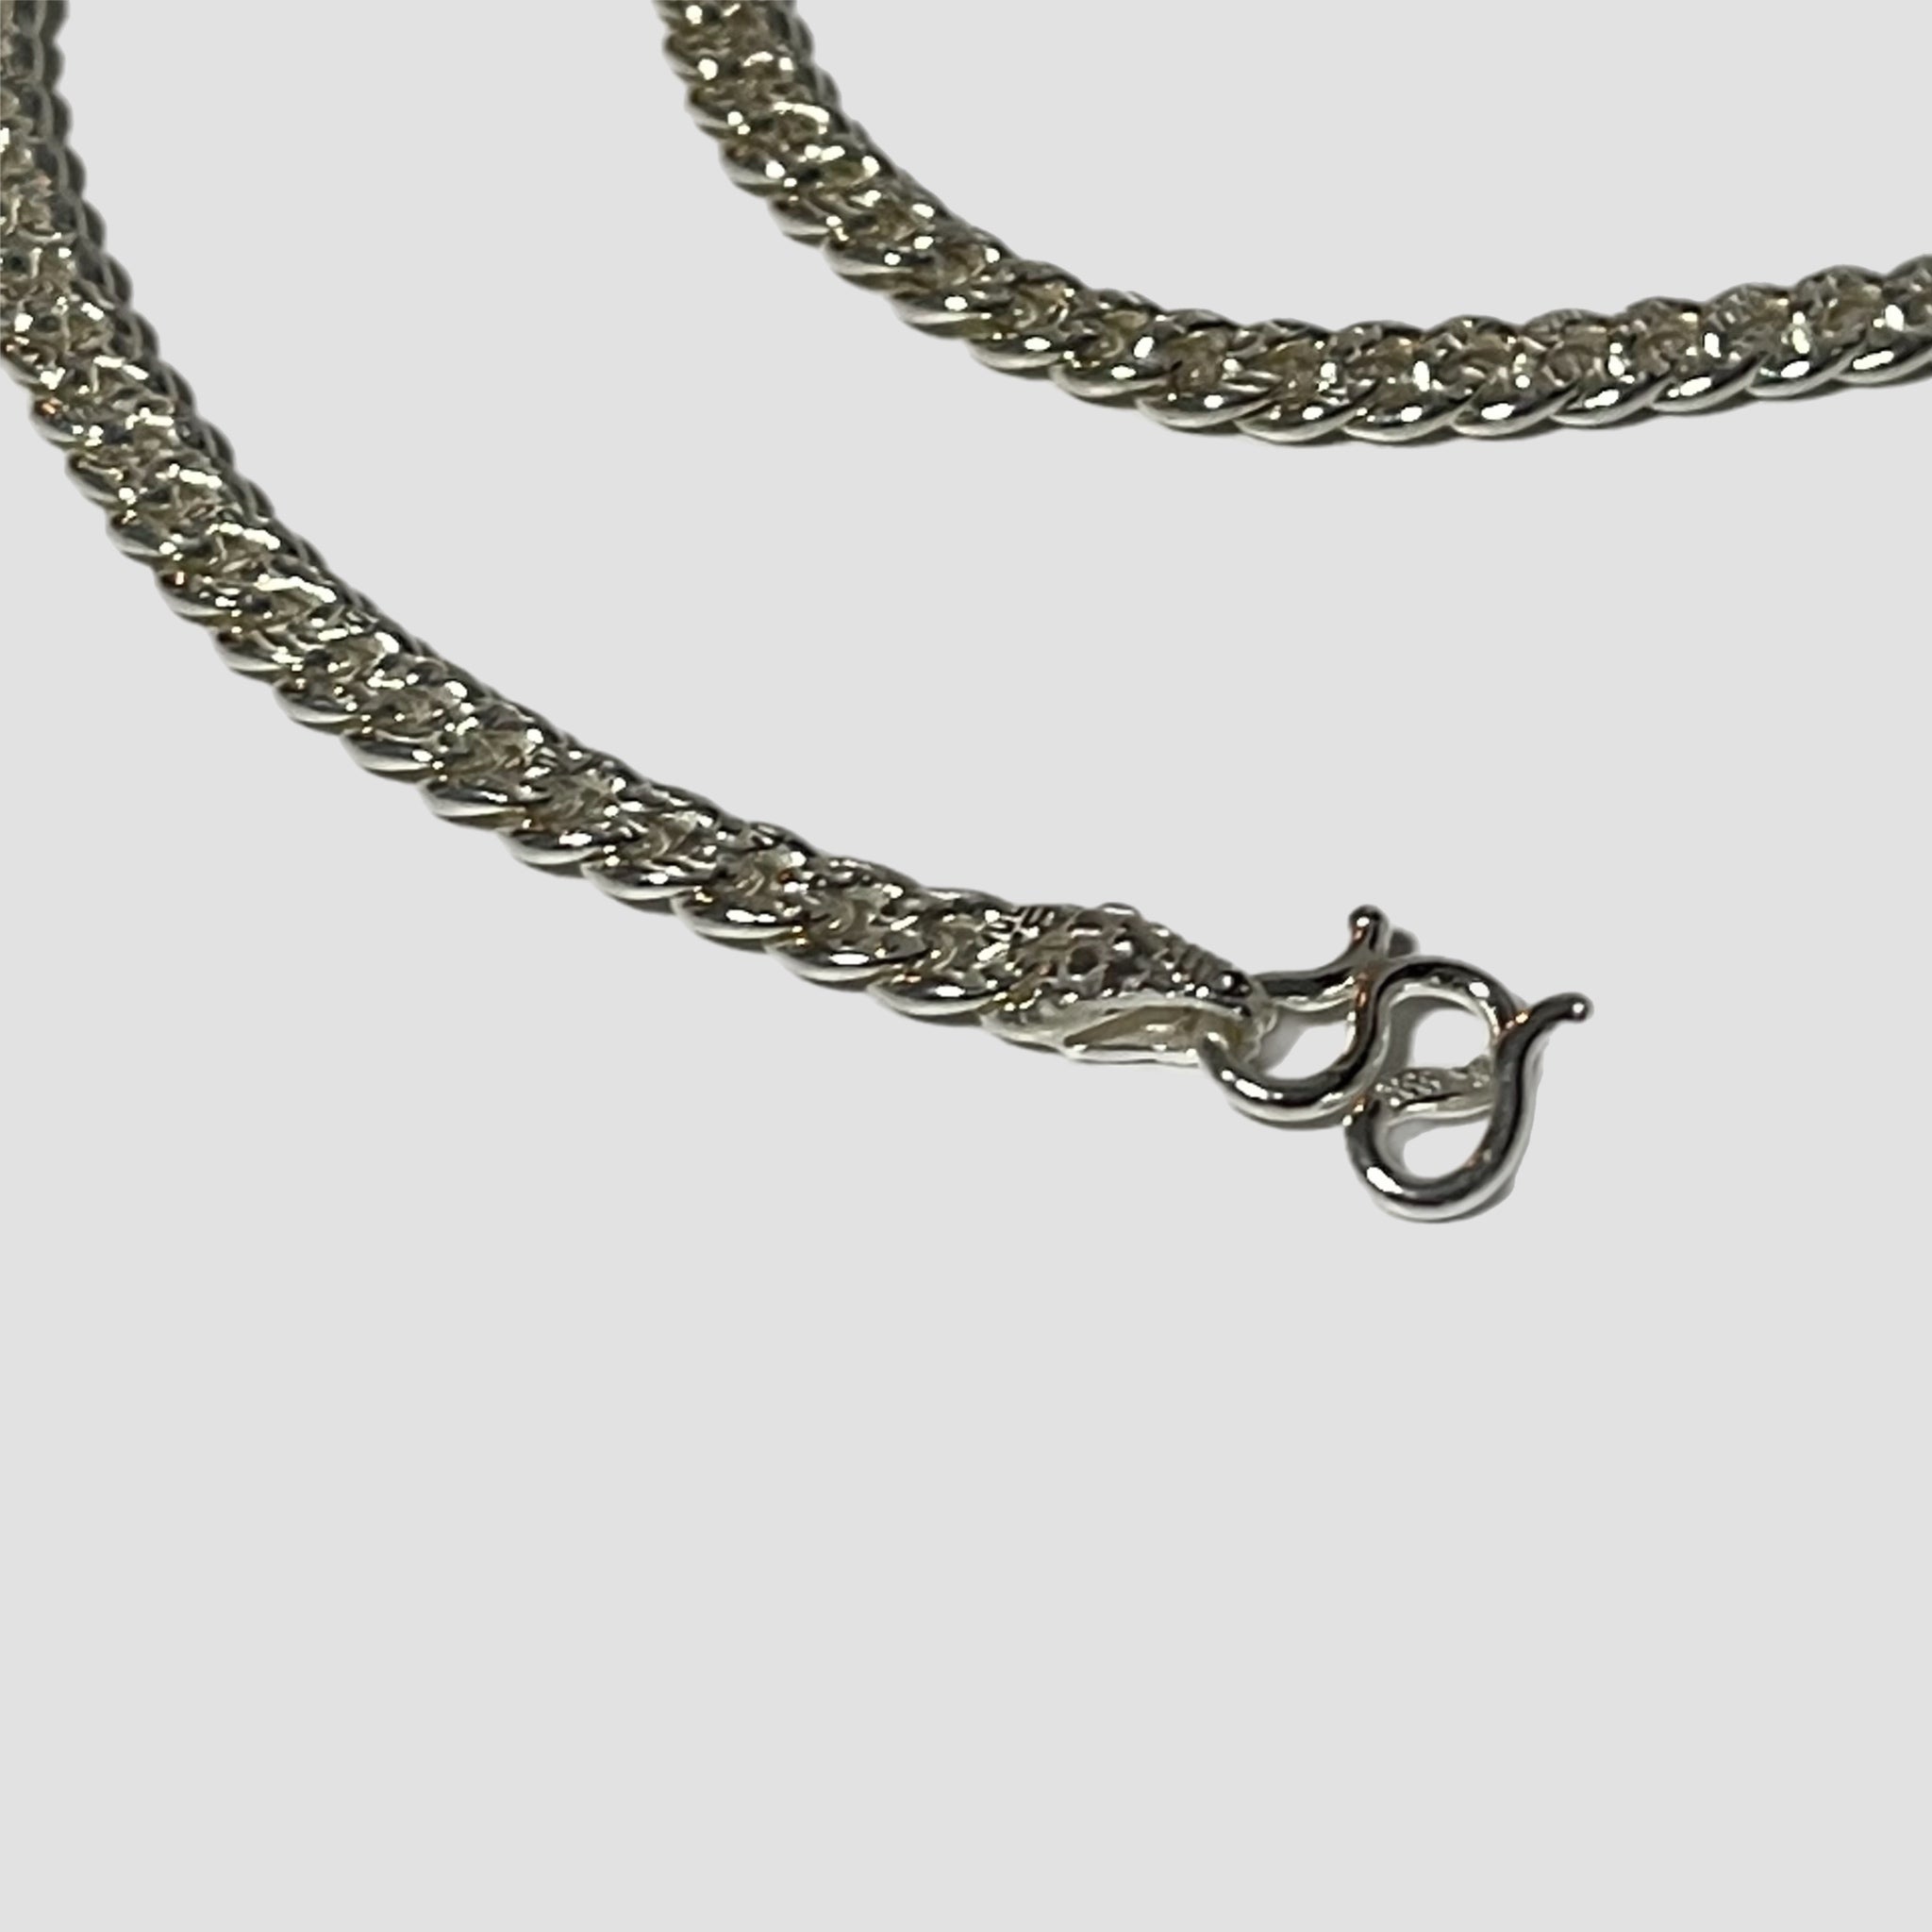 Sterling silver 999 Patterned Cuban Chain Necklace Original Allure